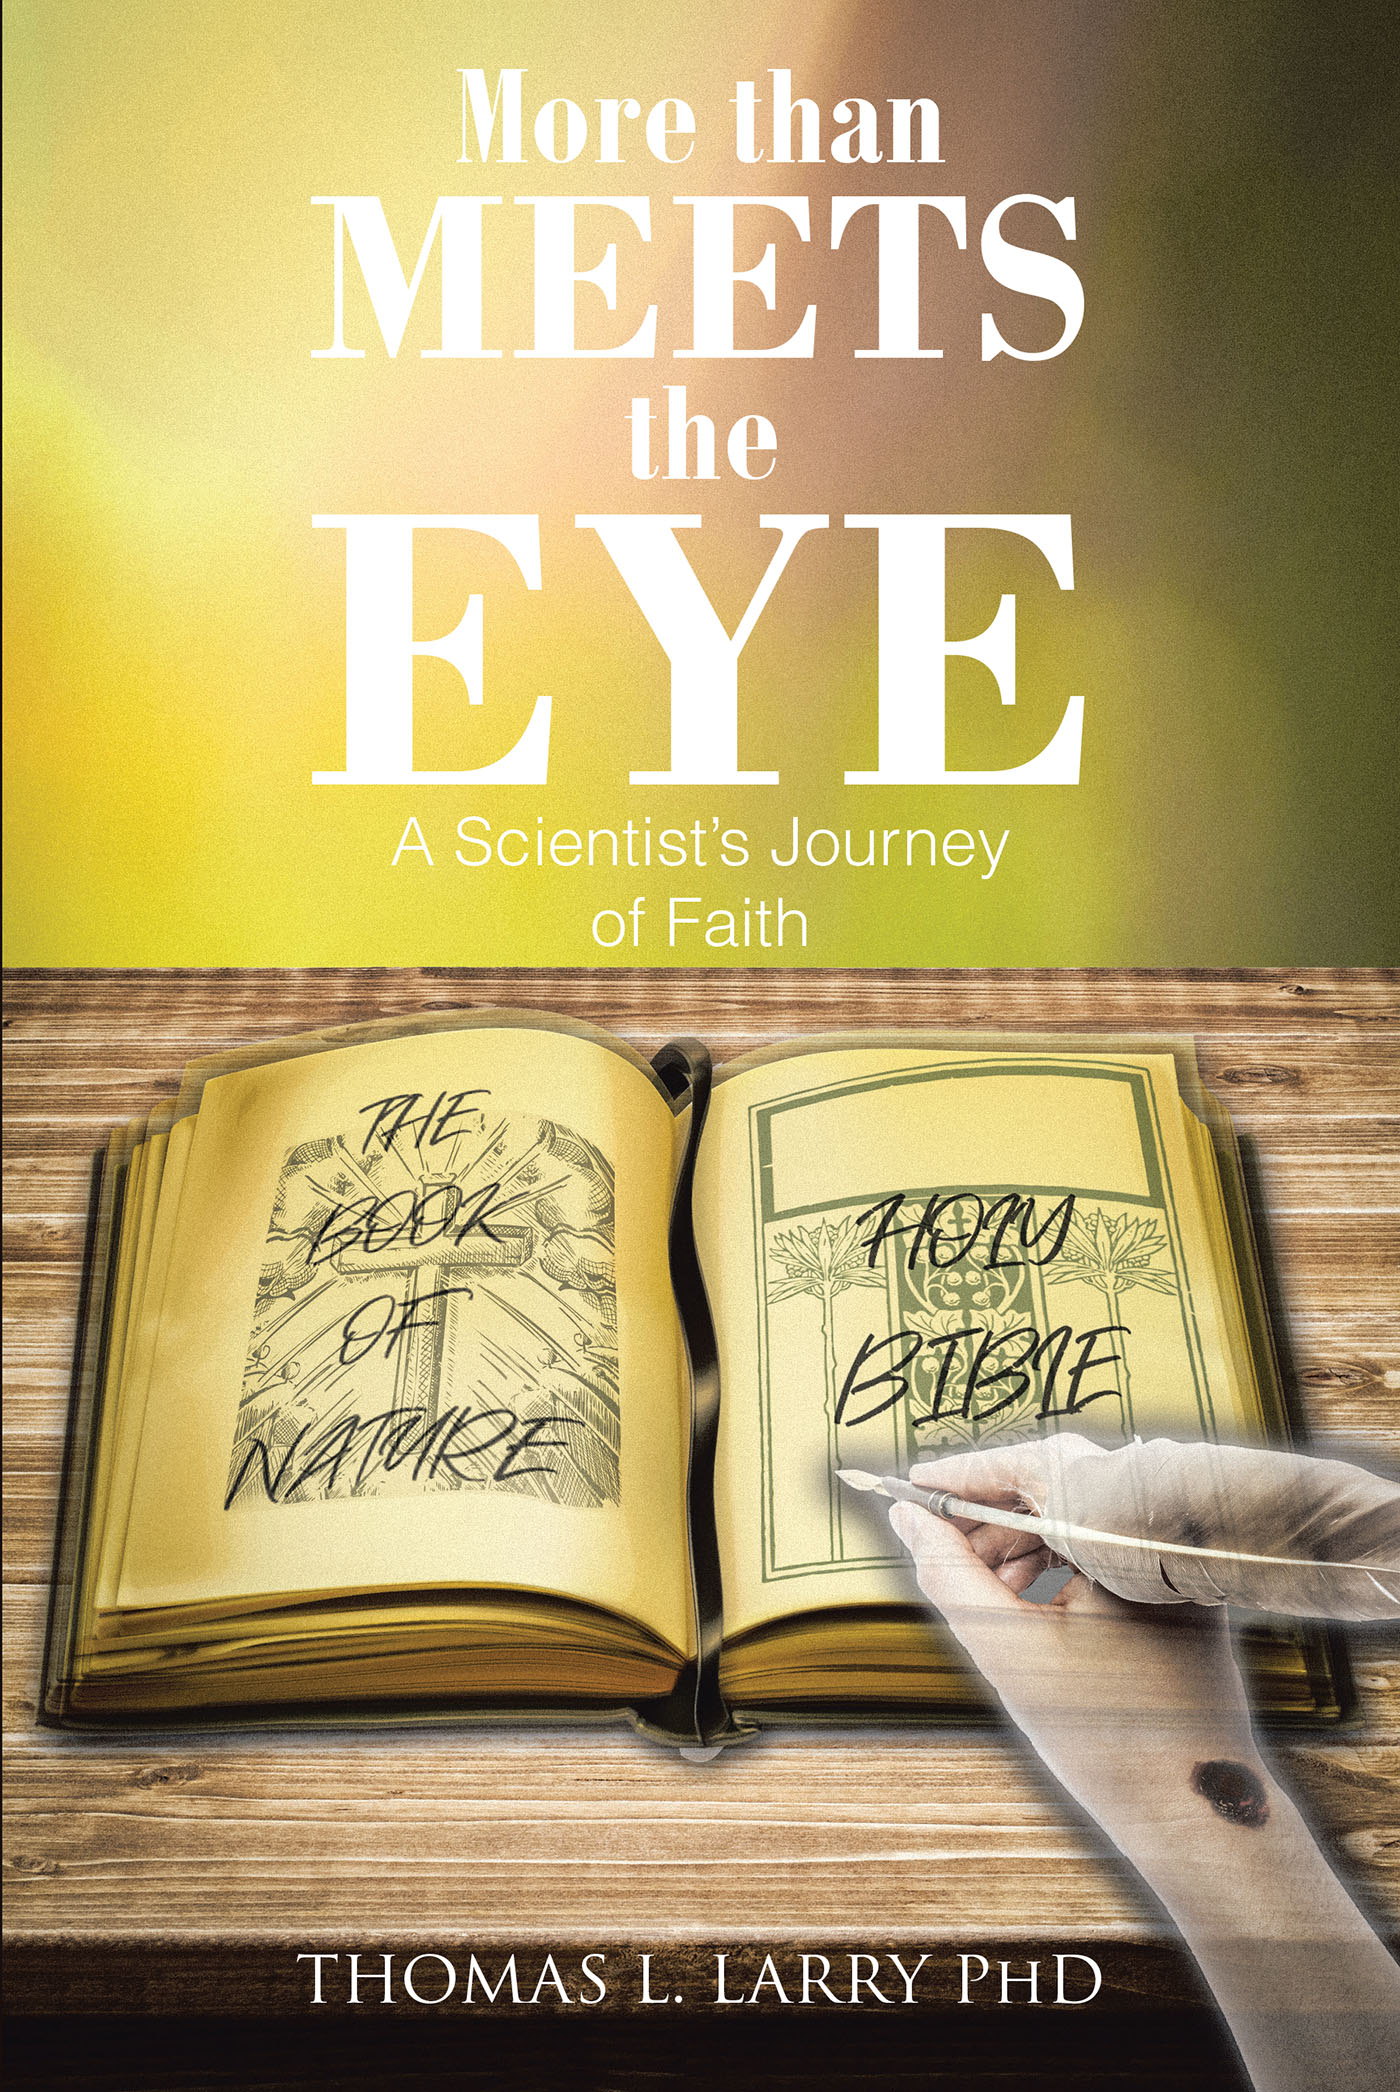 Thomas L. Larry PhD’s Newly Released “More Than Meets the Eye: A Scientist’s Journey of Faith” is a Compelling Discussion of Science and God’s Plan